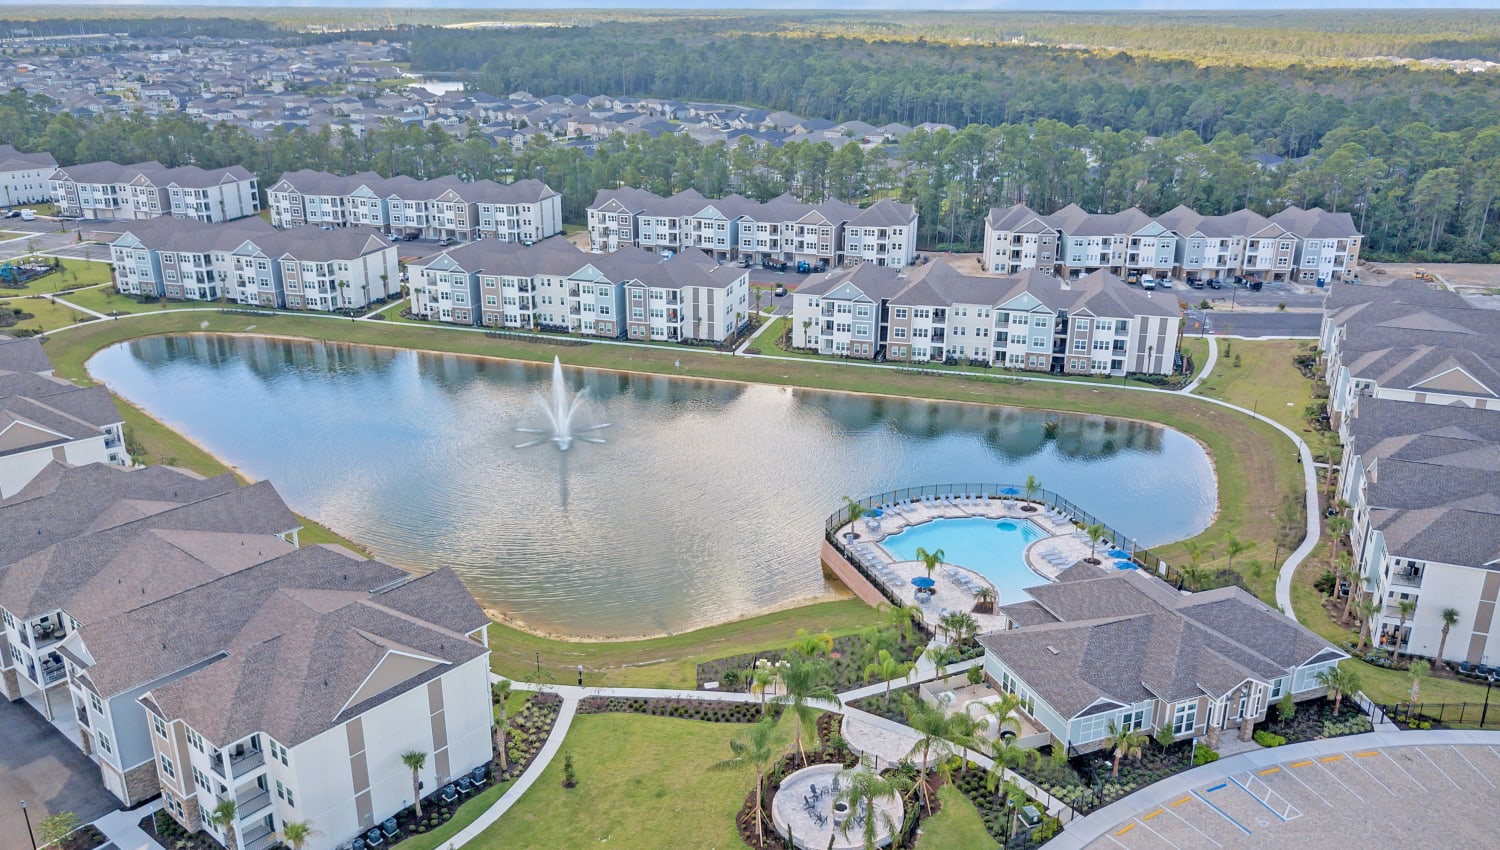 Aerial view of the community with pool and lake at The Carlton at Bartram Park in Jacksonville, Florida